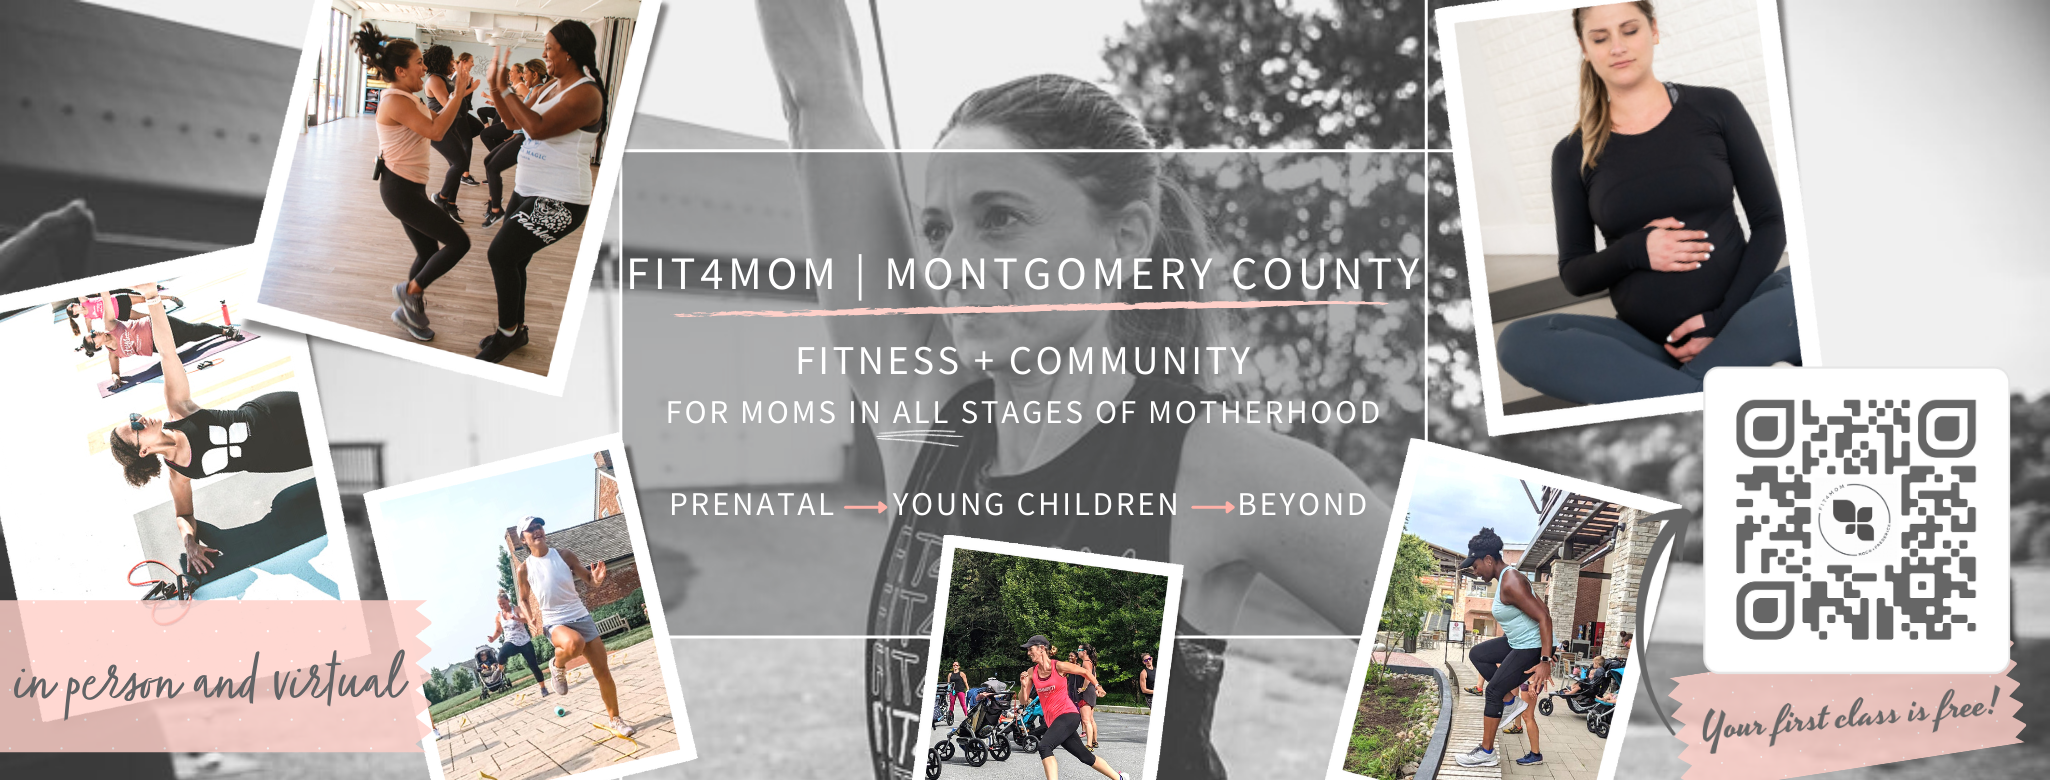 FIT4MOM MOCO FACEBOOK COVER.png